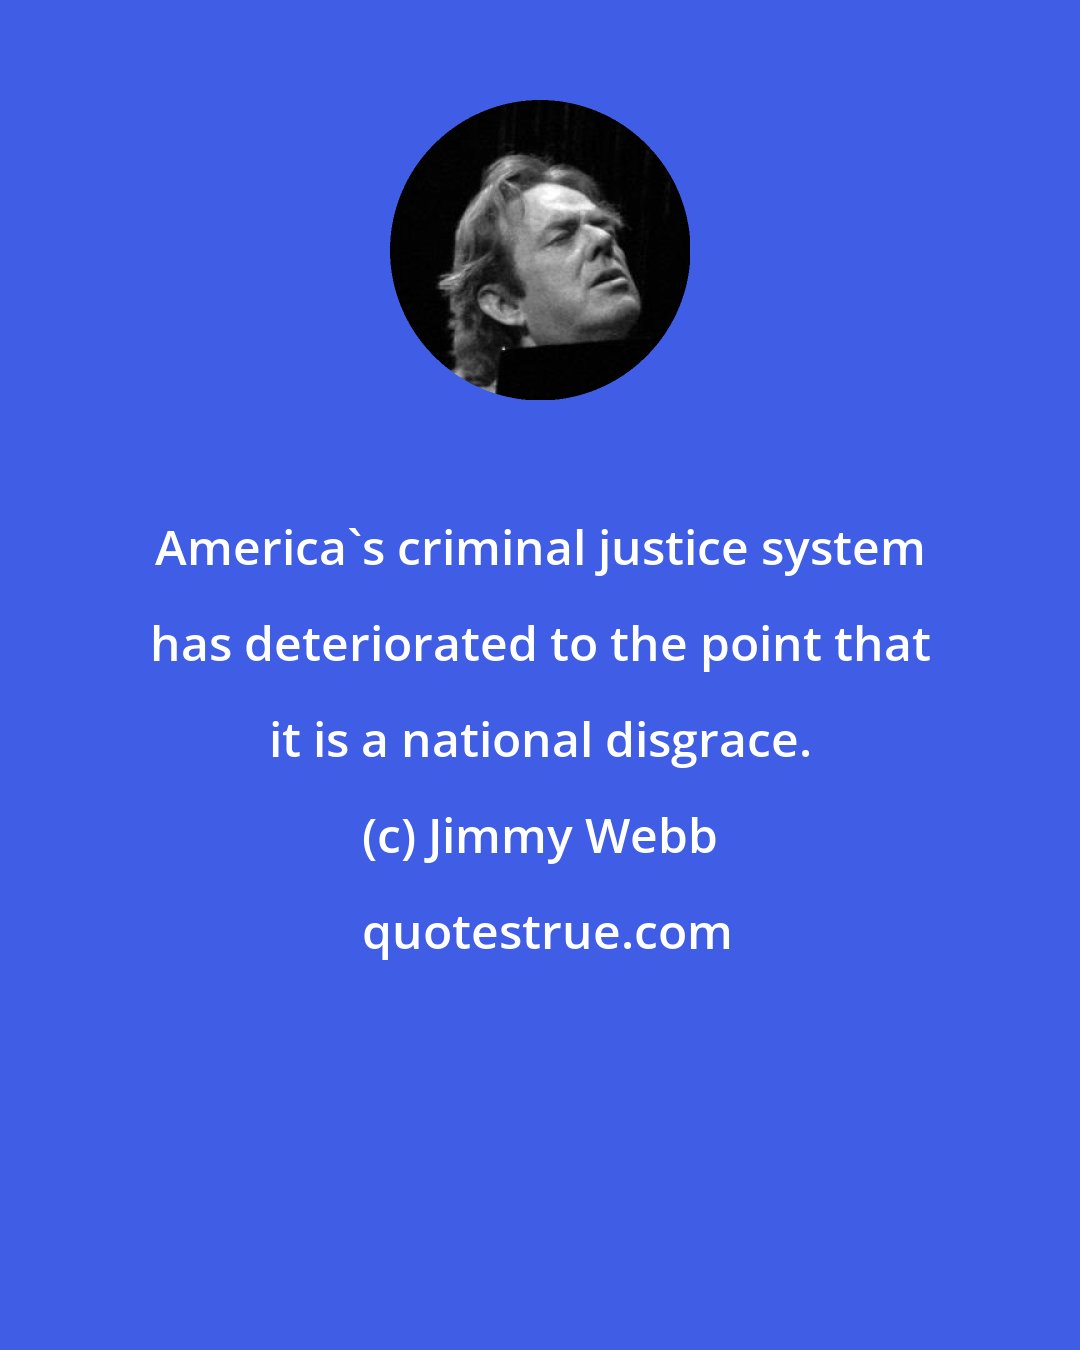 Jimmy Webb: America's criminal justice system has deteriorated to the point that it is a national disgrace.